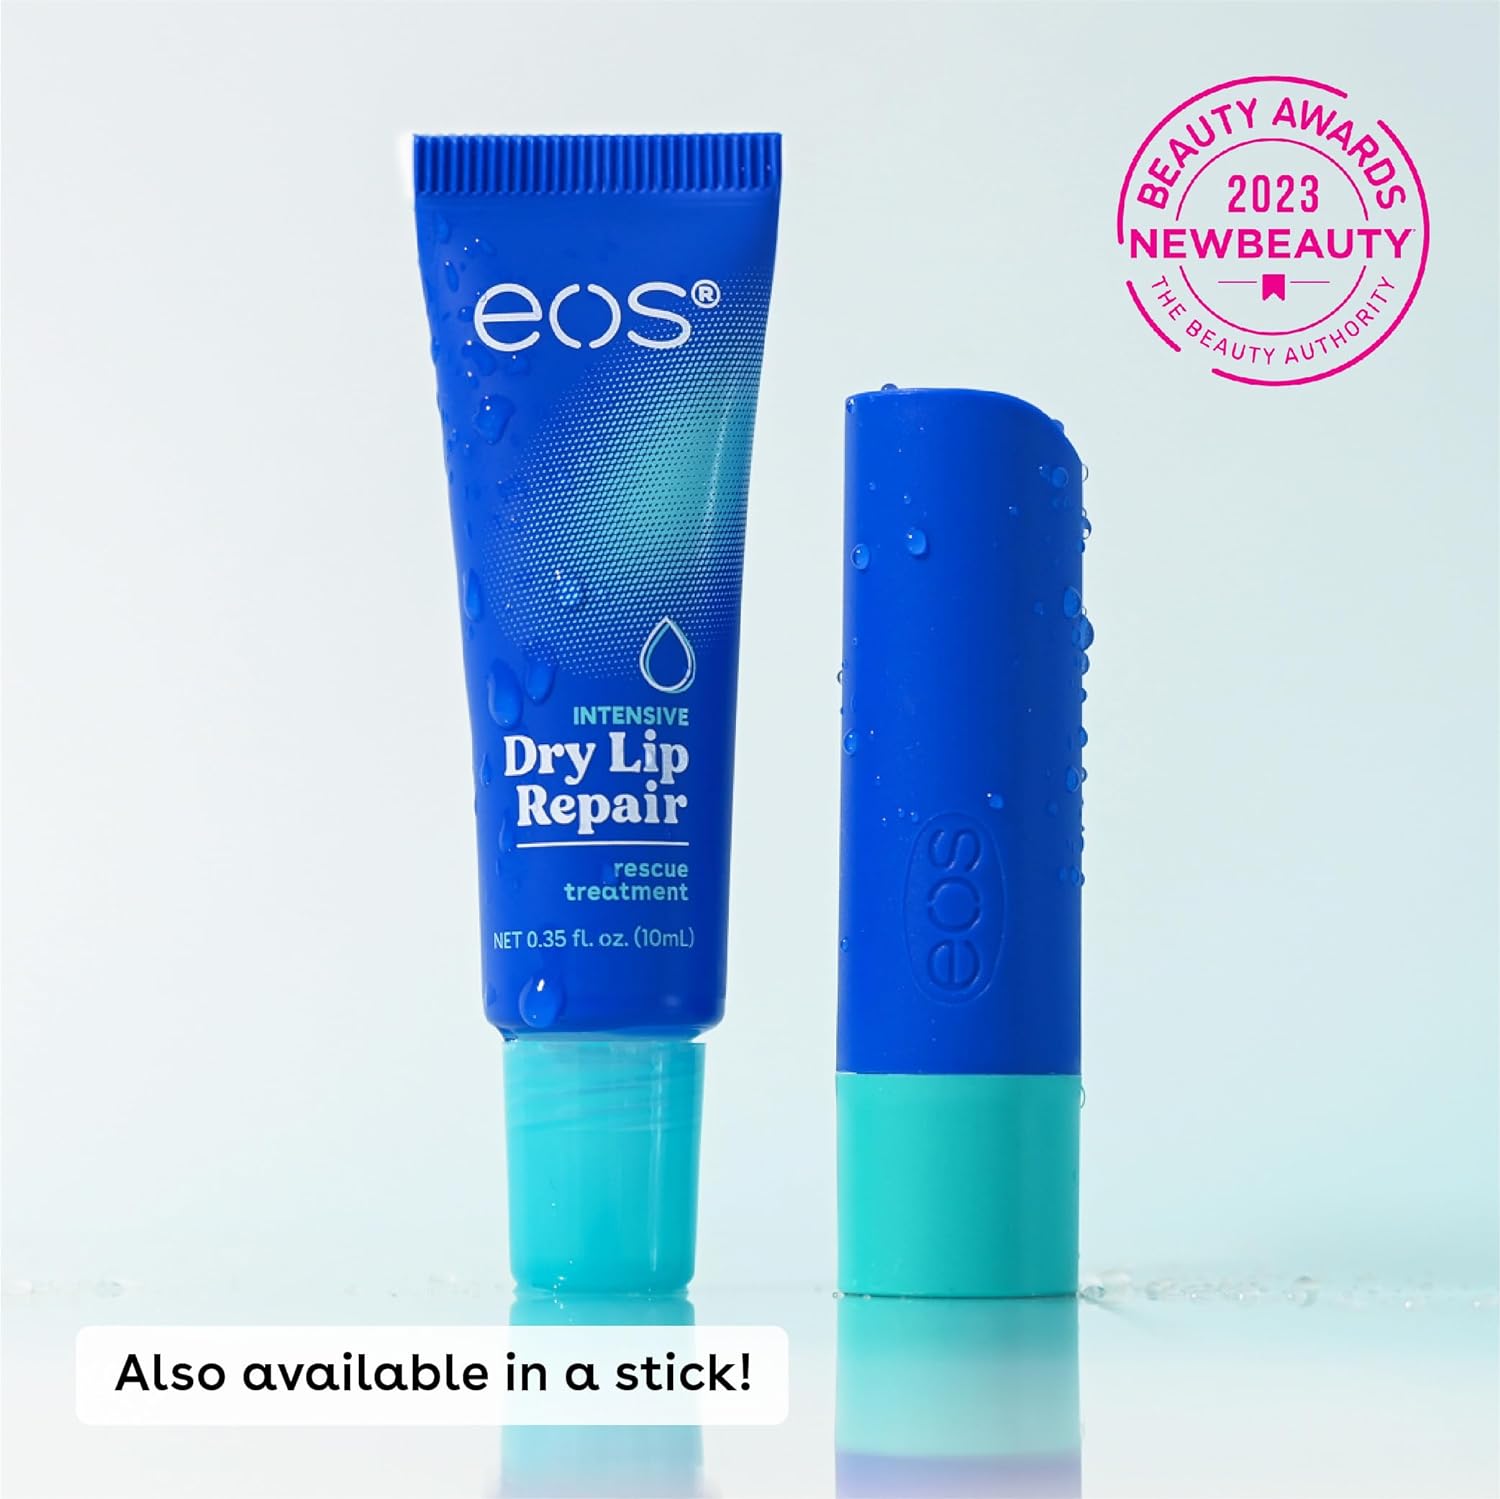 eos The Hero Lip Repair, Extra Dry Lip Treatment, 24HR Moisture, Overnight Lip Treatment, Natural Strawberry Extract, 0.35 fl oz : Beauty & Personal Care